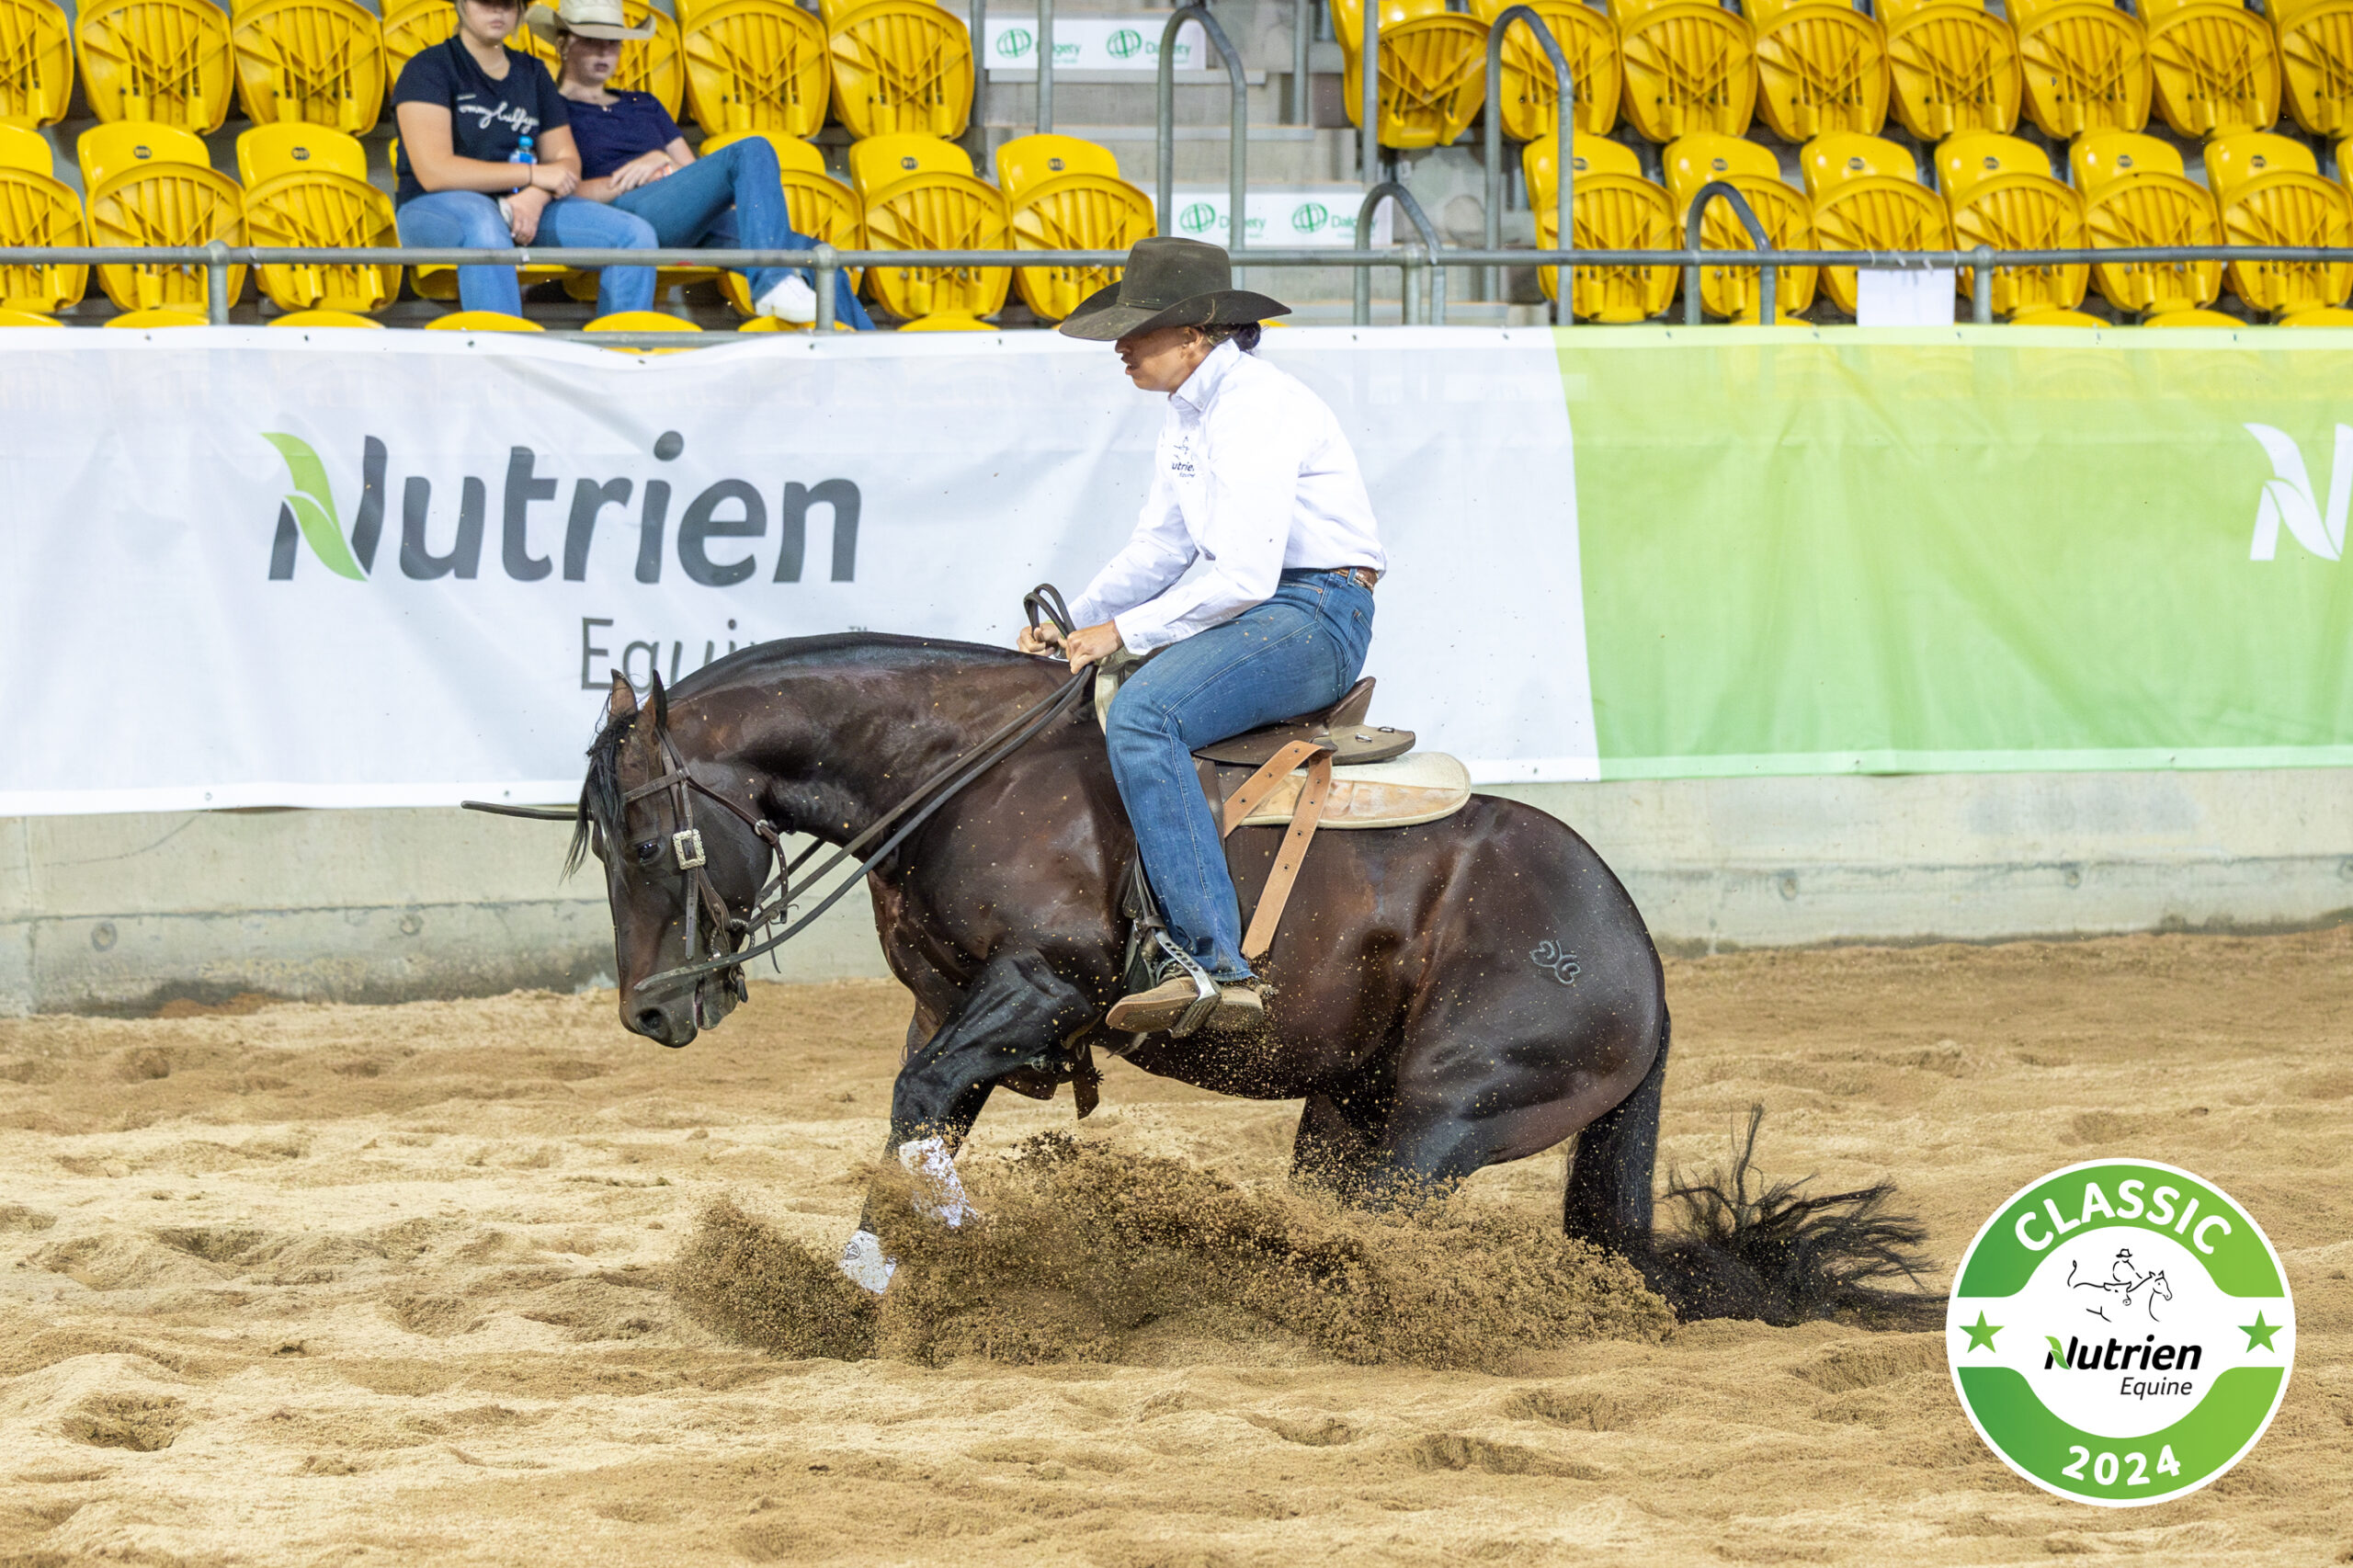 Round 2 competition heats up at the Nutrien Classic